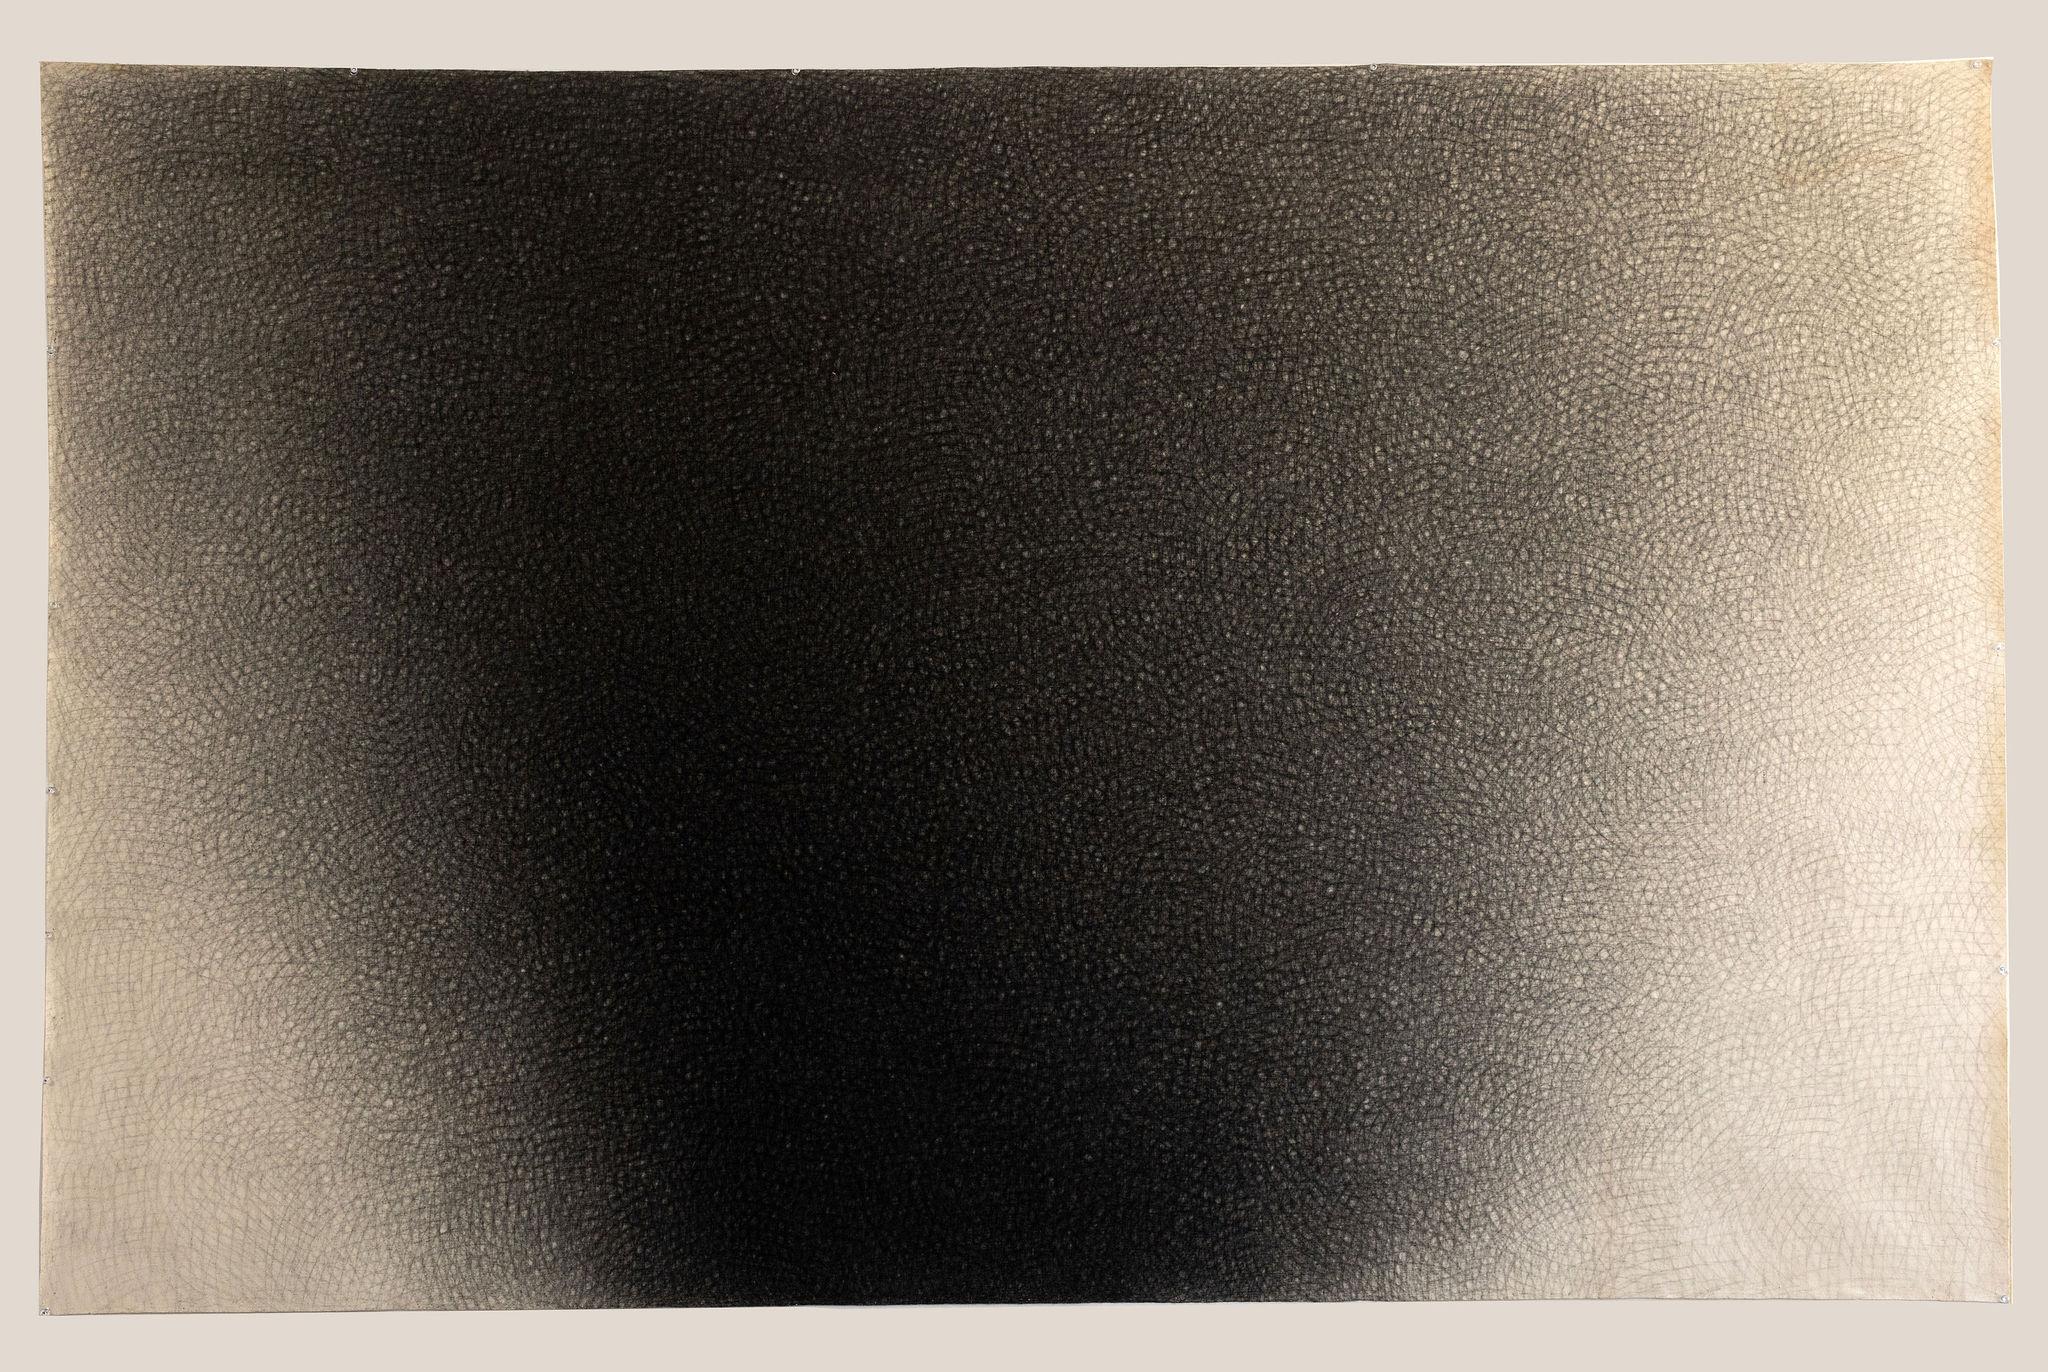 Jack Scott
"Airveil"
3/1976
Charcoal on unprimed canvas sprayed with custom fixative
94.25"x60.25" unstretched
Signed, titled and dated in pencil on reverse

Excellent Condition - Minor wear consistent with age and history.

This canvas is a